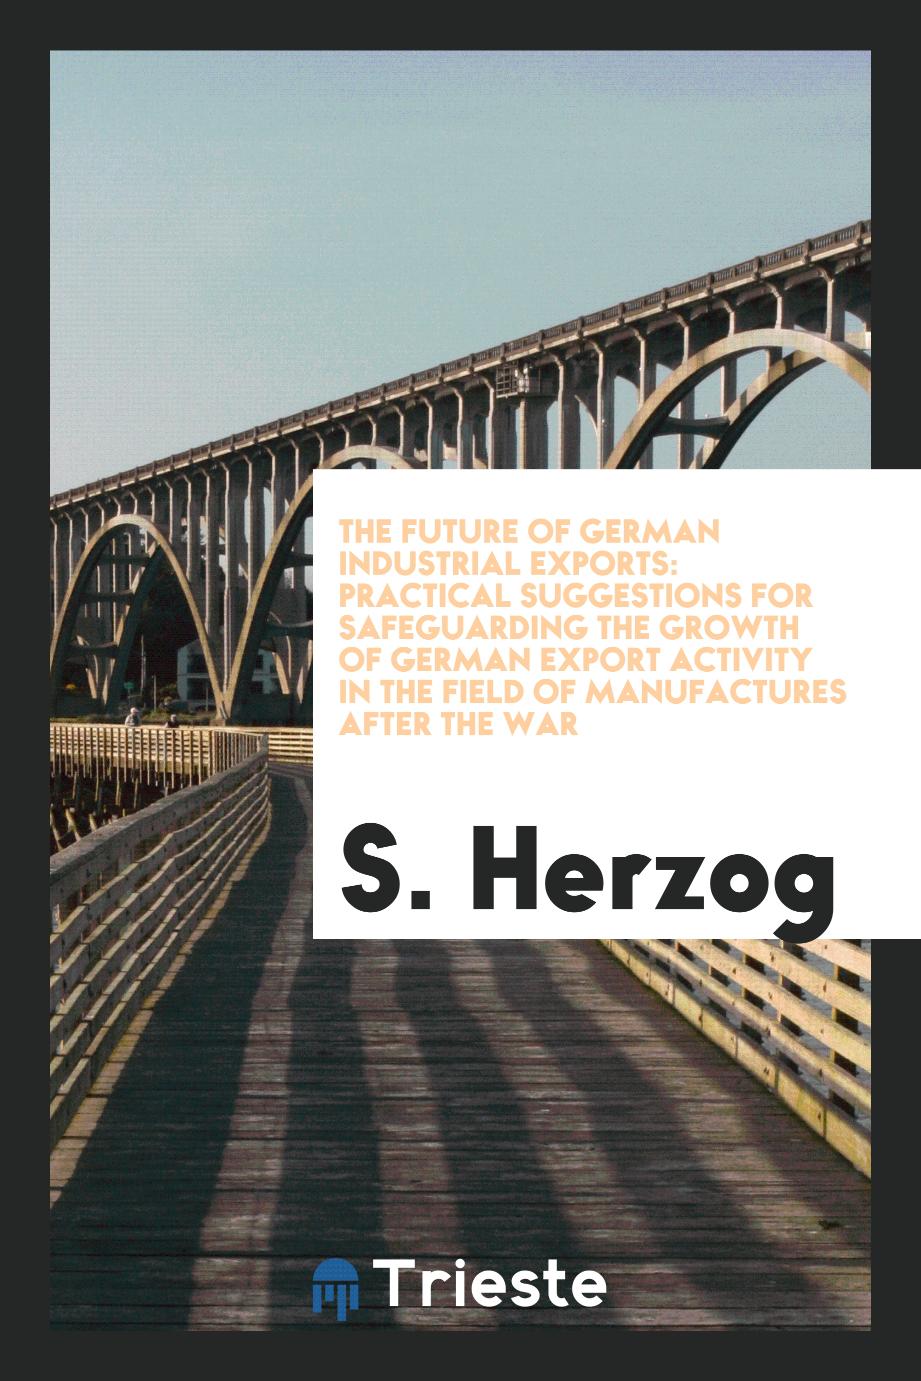 The Future of German Industrial Exports: Practical Suggestions for Safeguarding the Growth of German Export Activity in the Field of Manufactures after the War